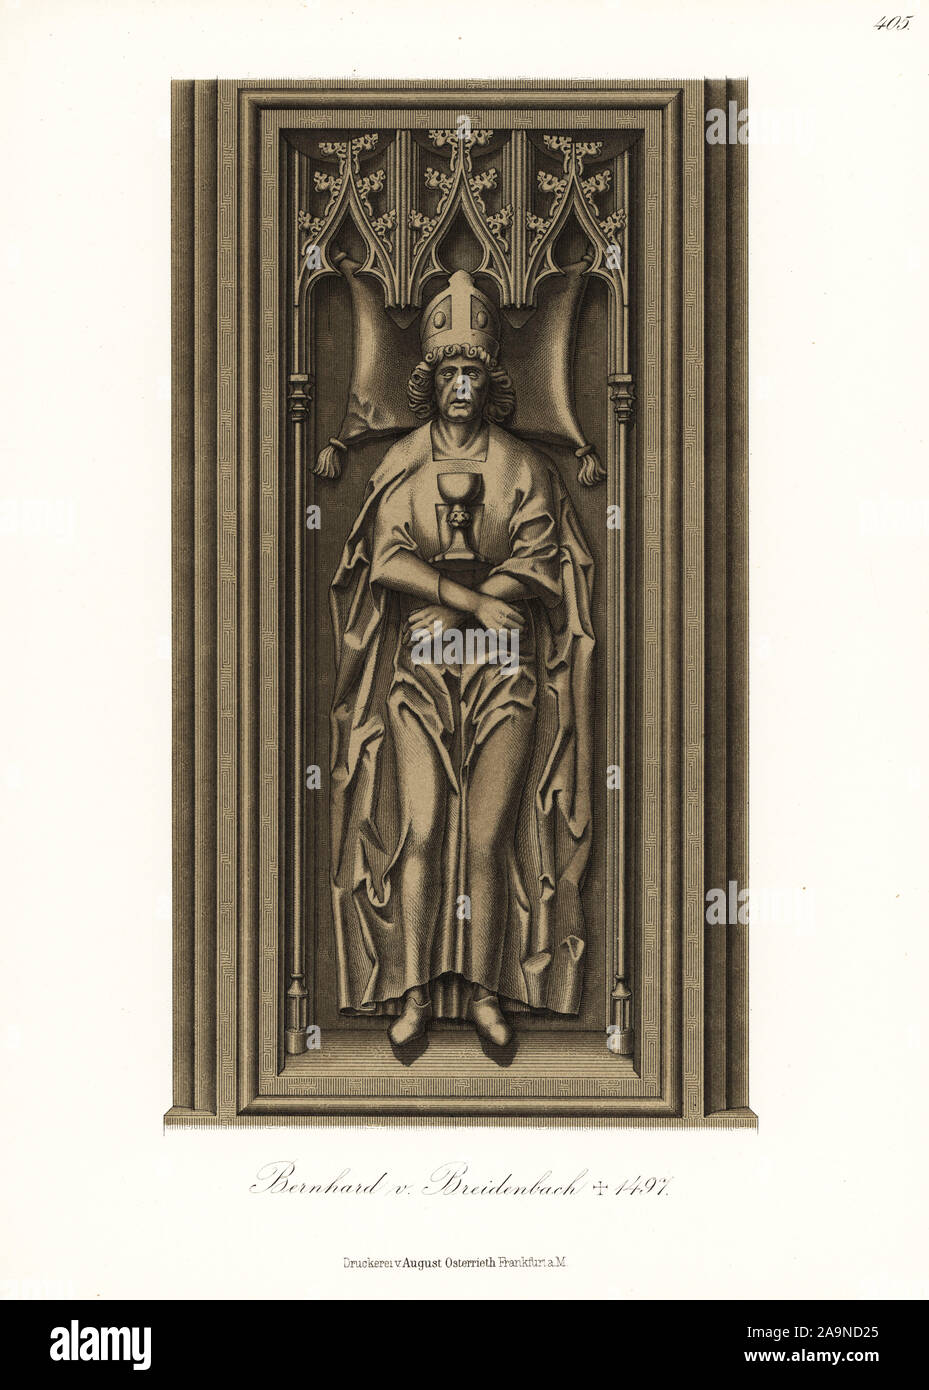 Bernhard von Breidenbach, politician in the Electorate of Mainz and author of Peregrinatio in terram sanctum, 1440-1497. From the grave effigy in Mainz Cathedral. Chromolithograph from Hefner-Alteneck's Costumes, Artworks and Appliances from the Middle Ages to the 17th Century, Frankfurt, 1889. Dr. Hefner-Alteneck (1811 - 1903) was a German museum curator, archaeologist, art historian, illustrator and etcher. Stock Photo